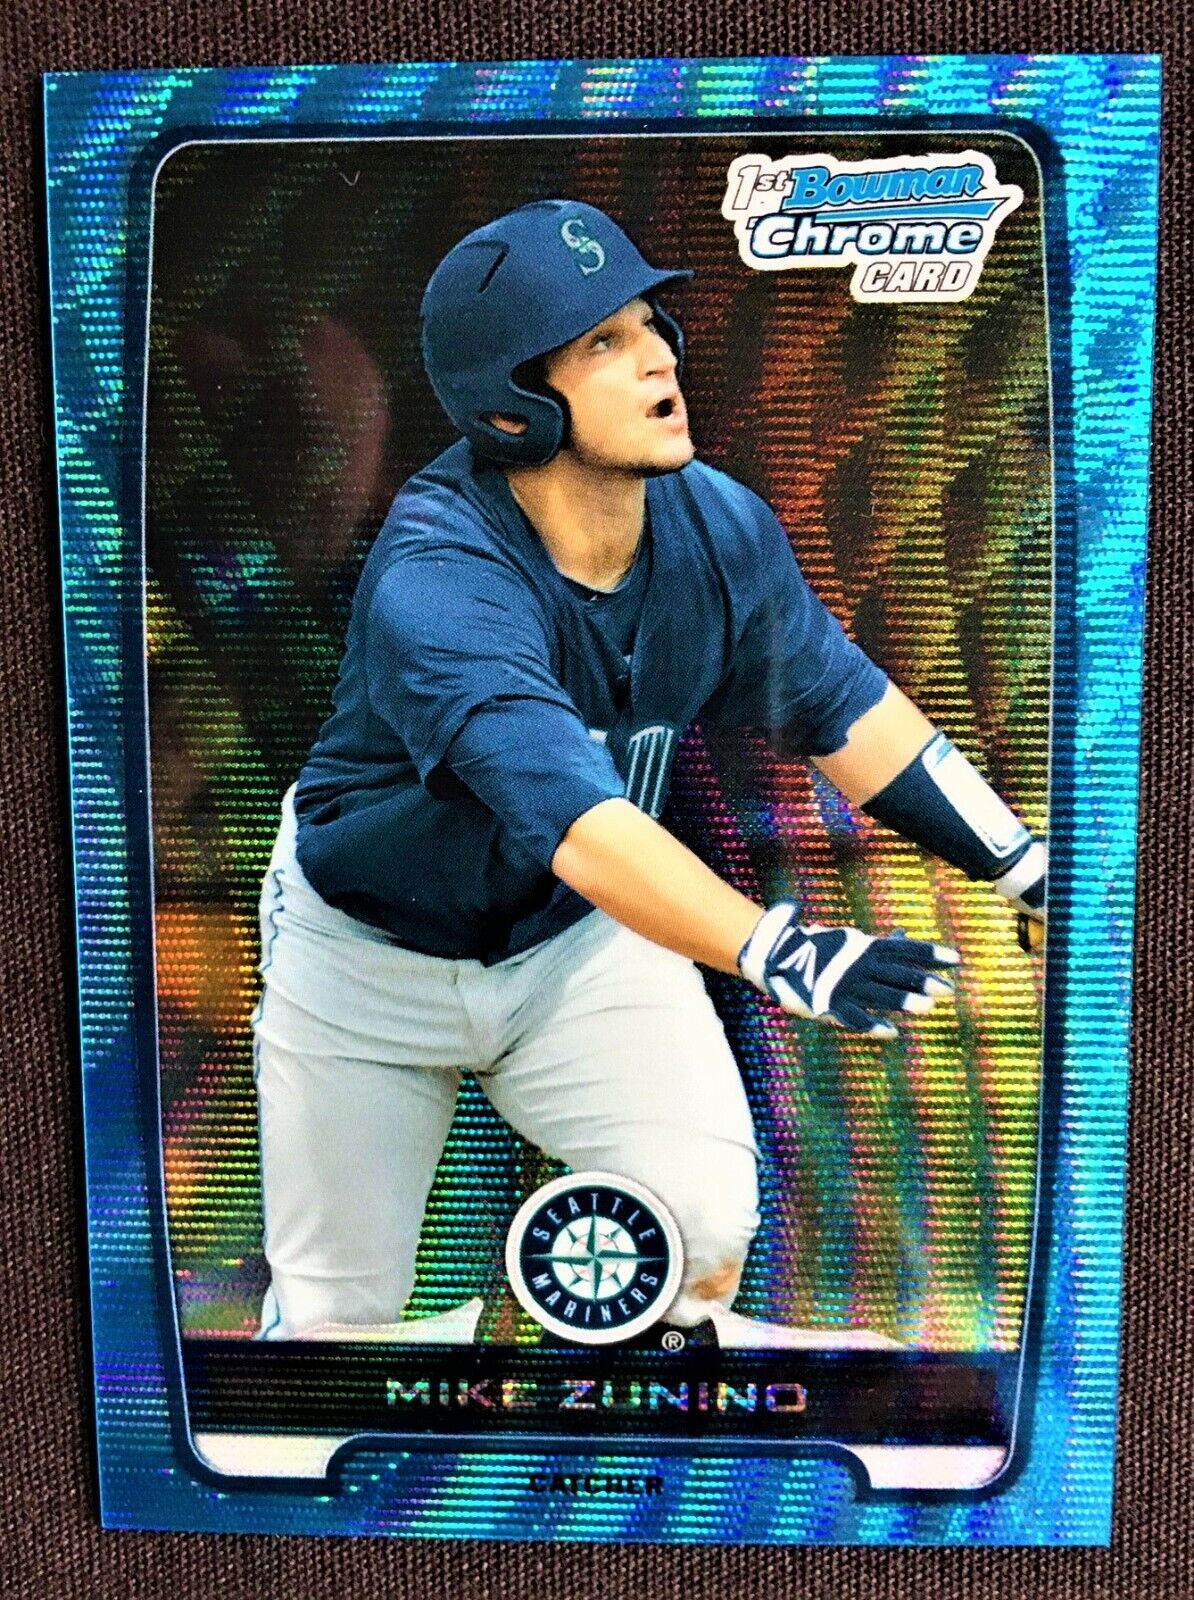 2012 Mike Zunino 1st Bowman Chrome Blue WAVE Refractor BDPP25 RAYS